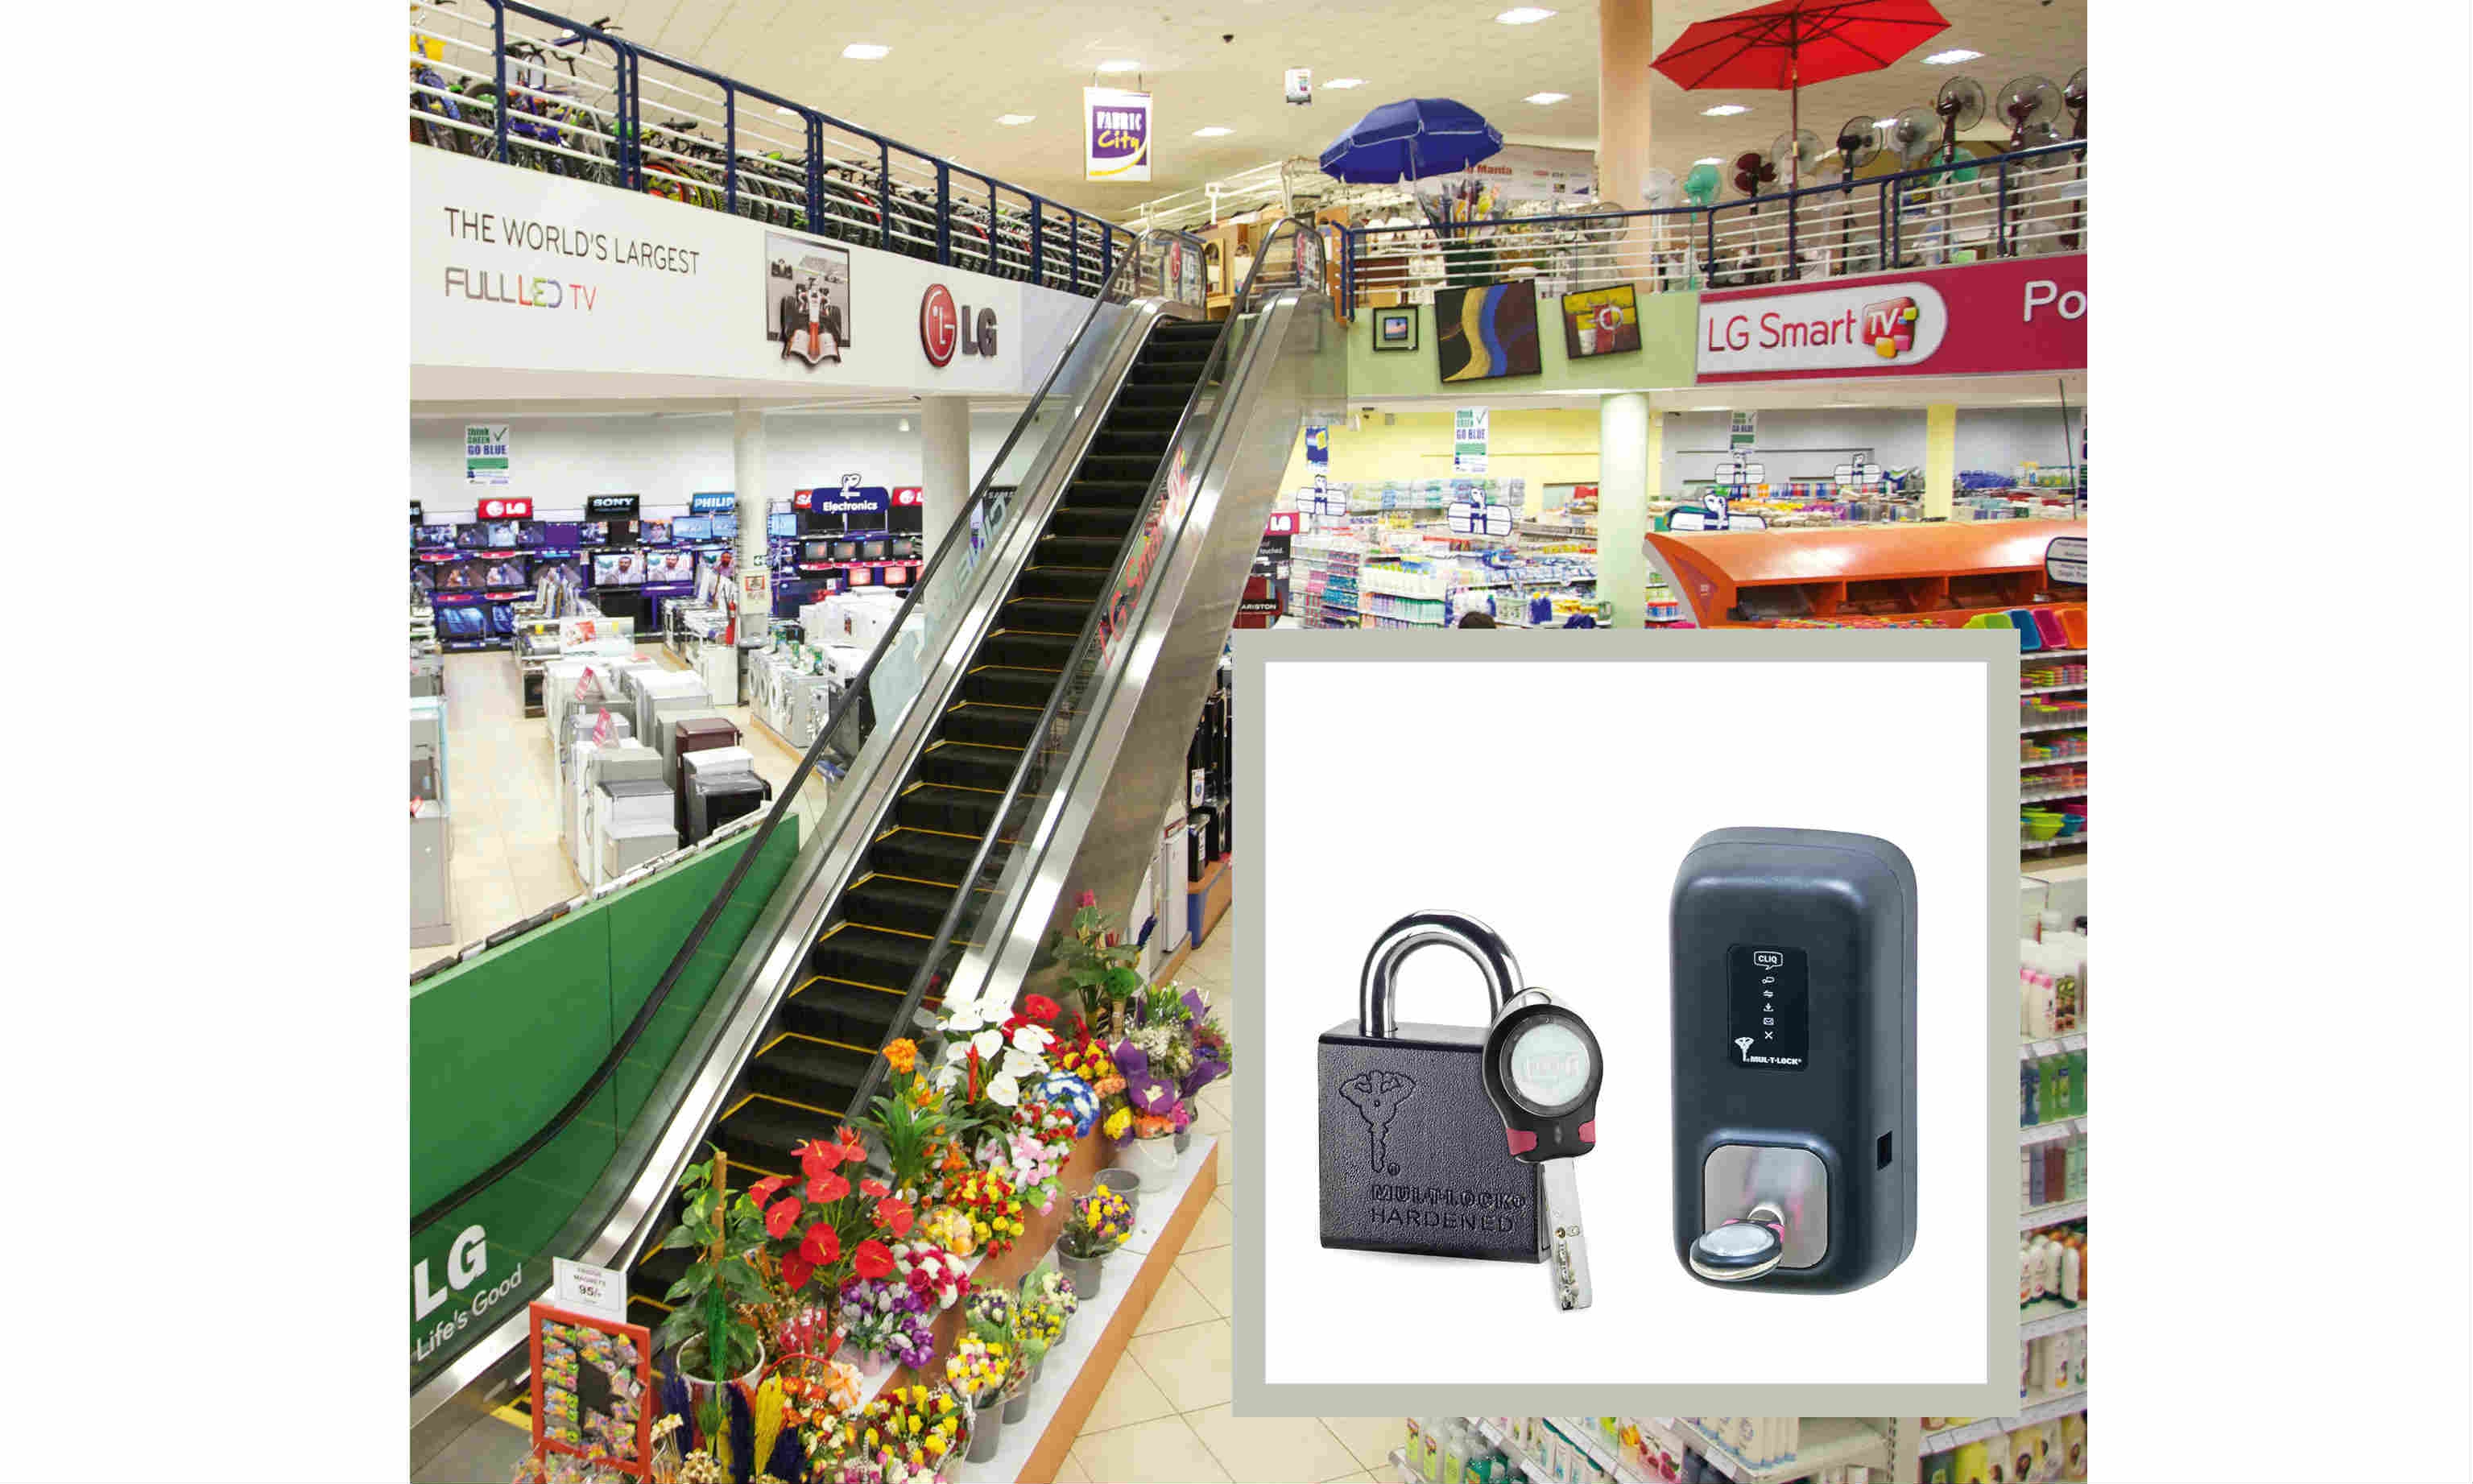 CLIQ® ends the security threat of lost keys at East Africa’s major retailer